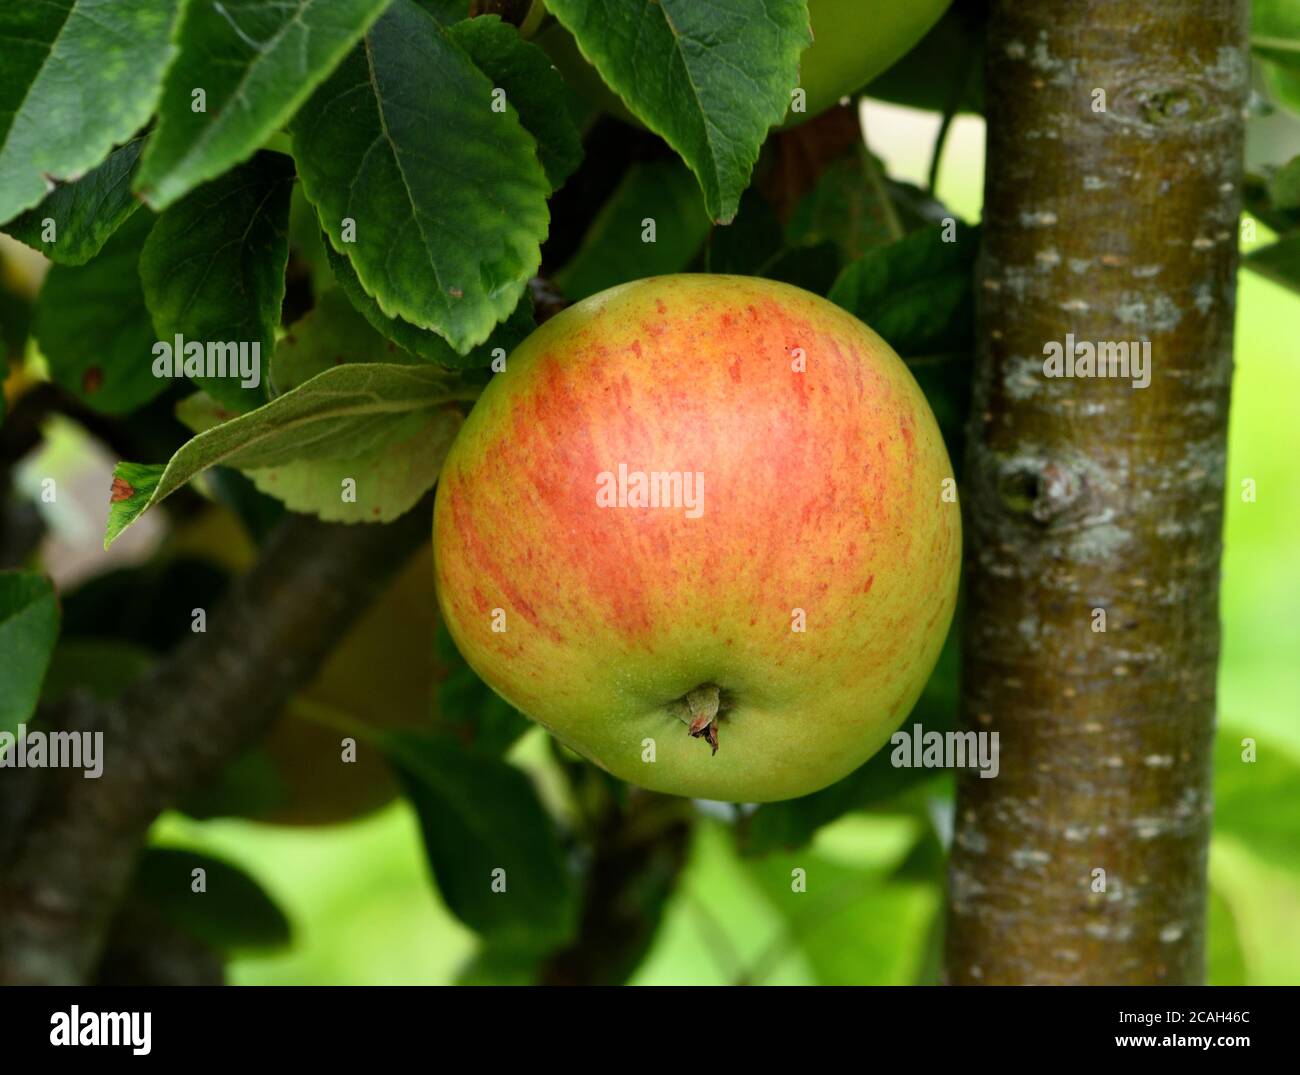 A Discovery apple on the tree. Stock Photo